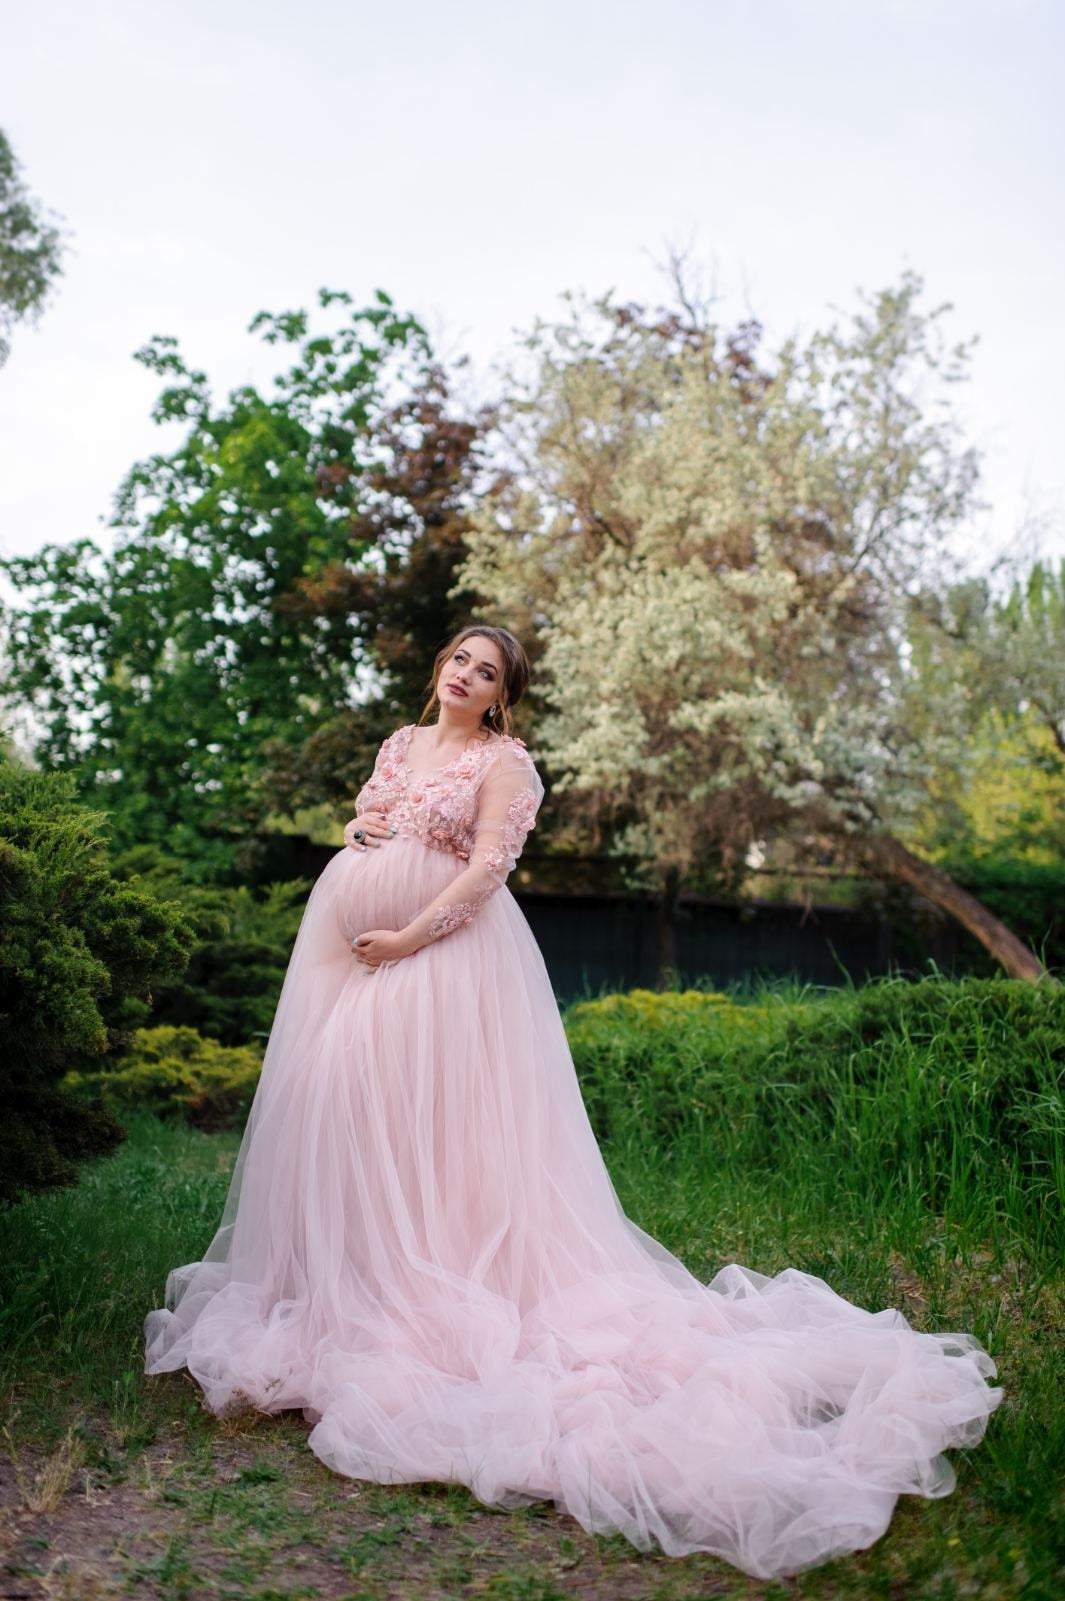 Maternity Photoshoot Dress Hire - Pink Tulle Gown – Luxe Bumps AU